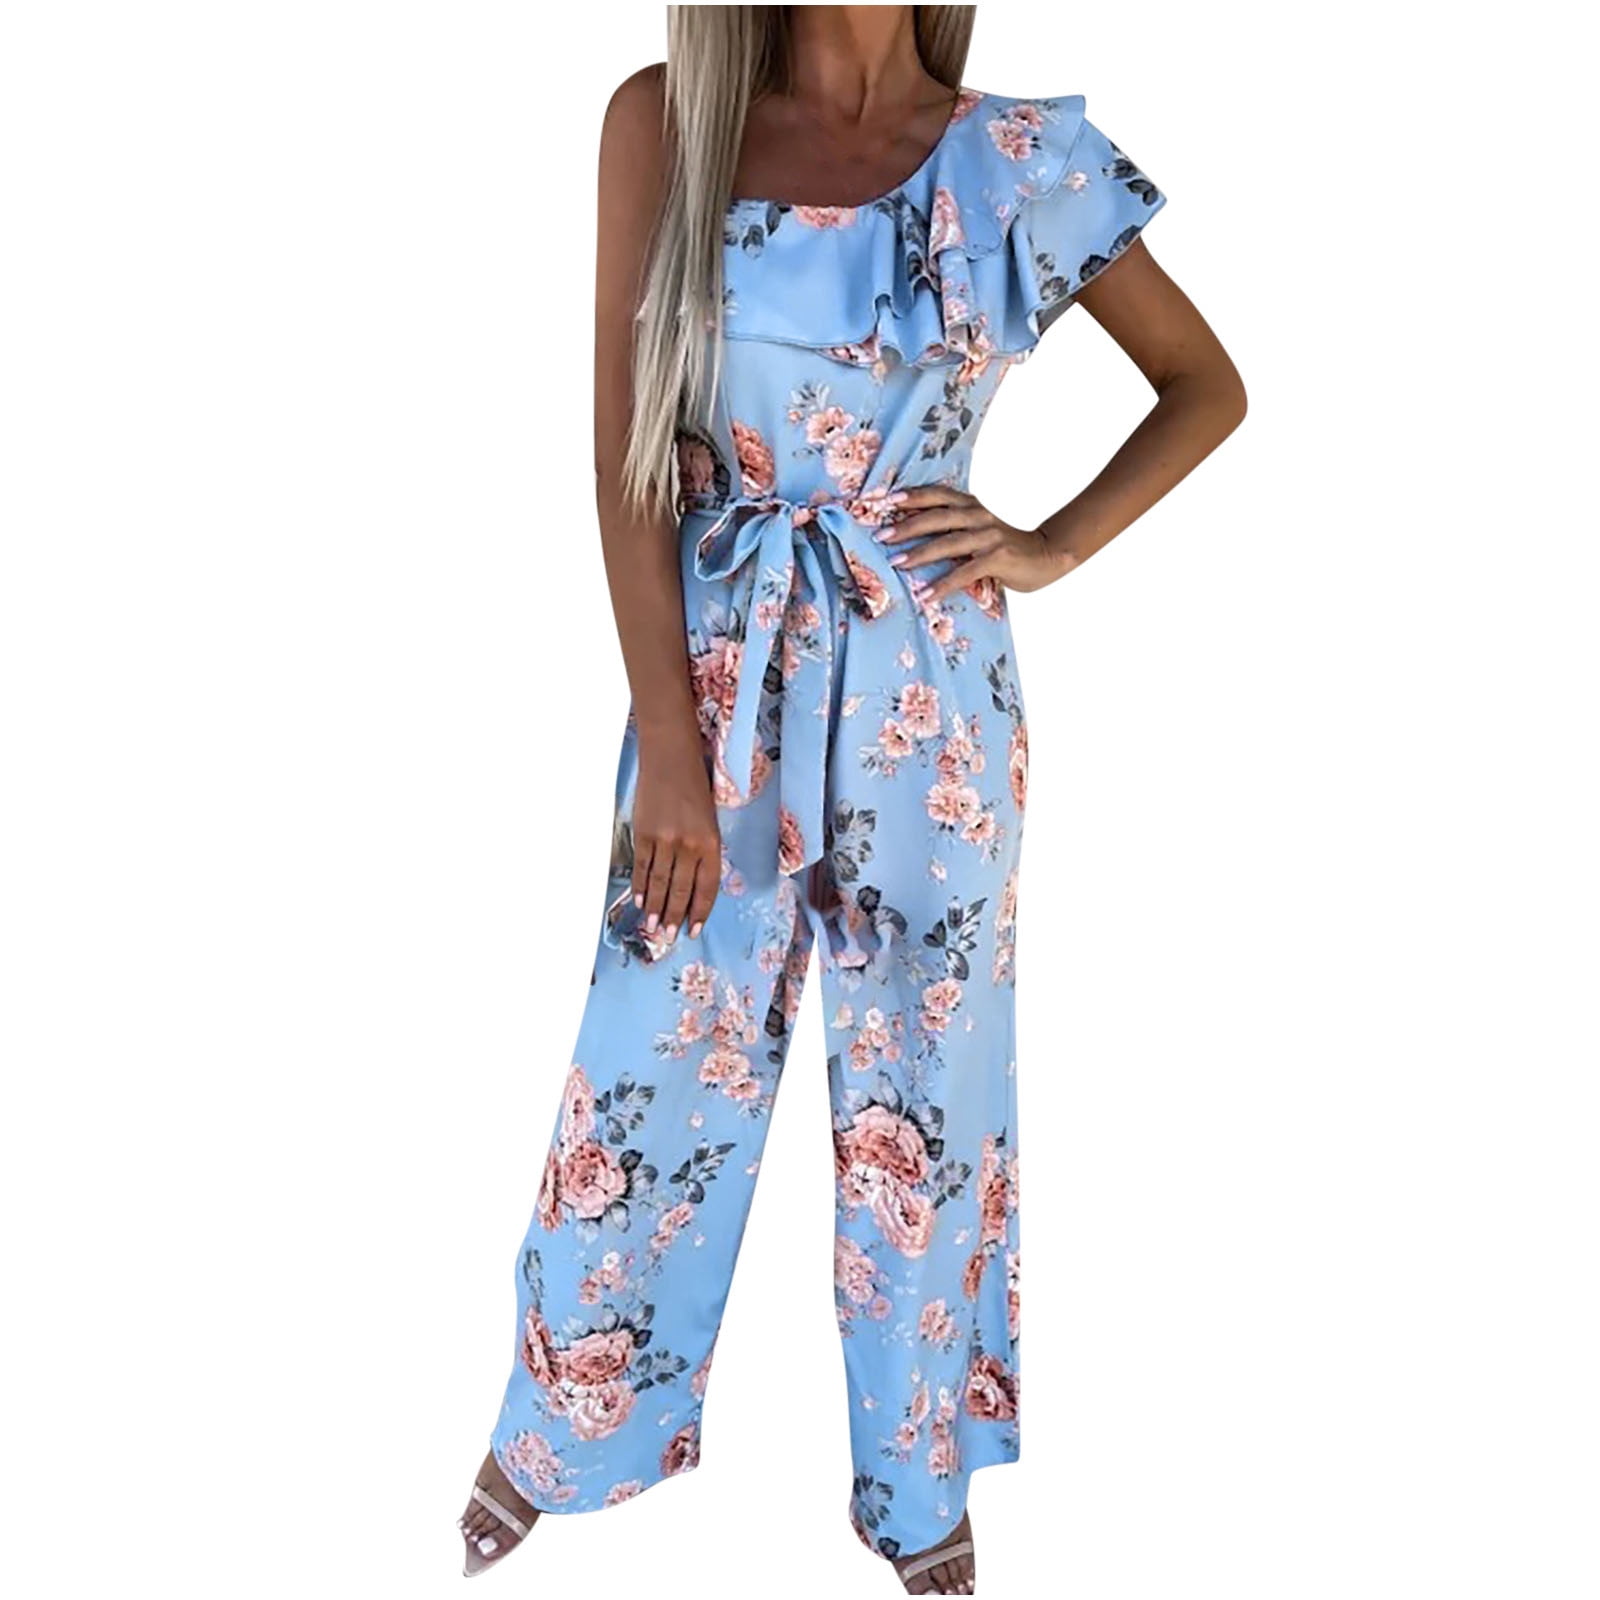 Girls Short Sleeve Belted Jumpsuit Outfit Size M (7/8) | Jumpsuit outfit,  Outfits, Belt jumpsuit